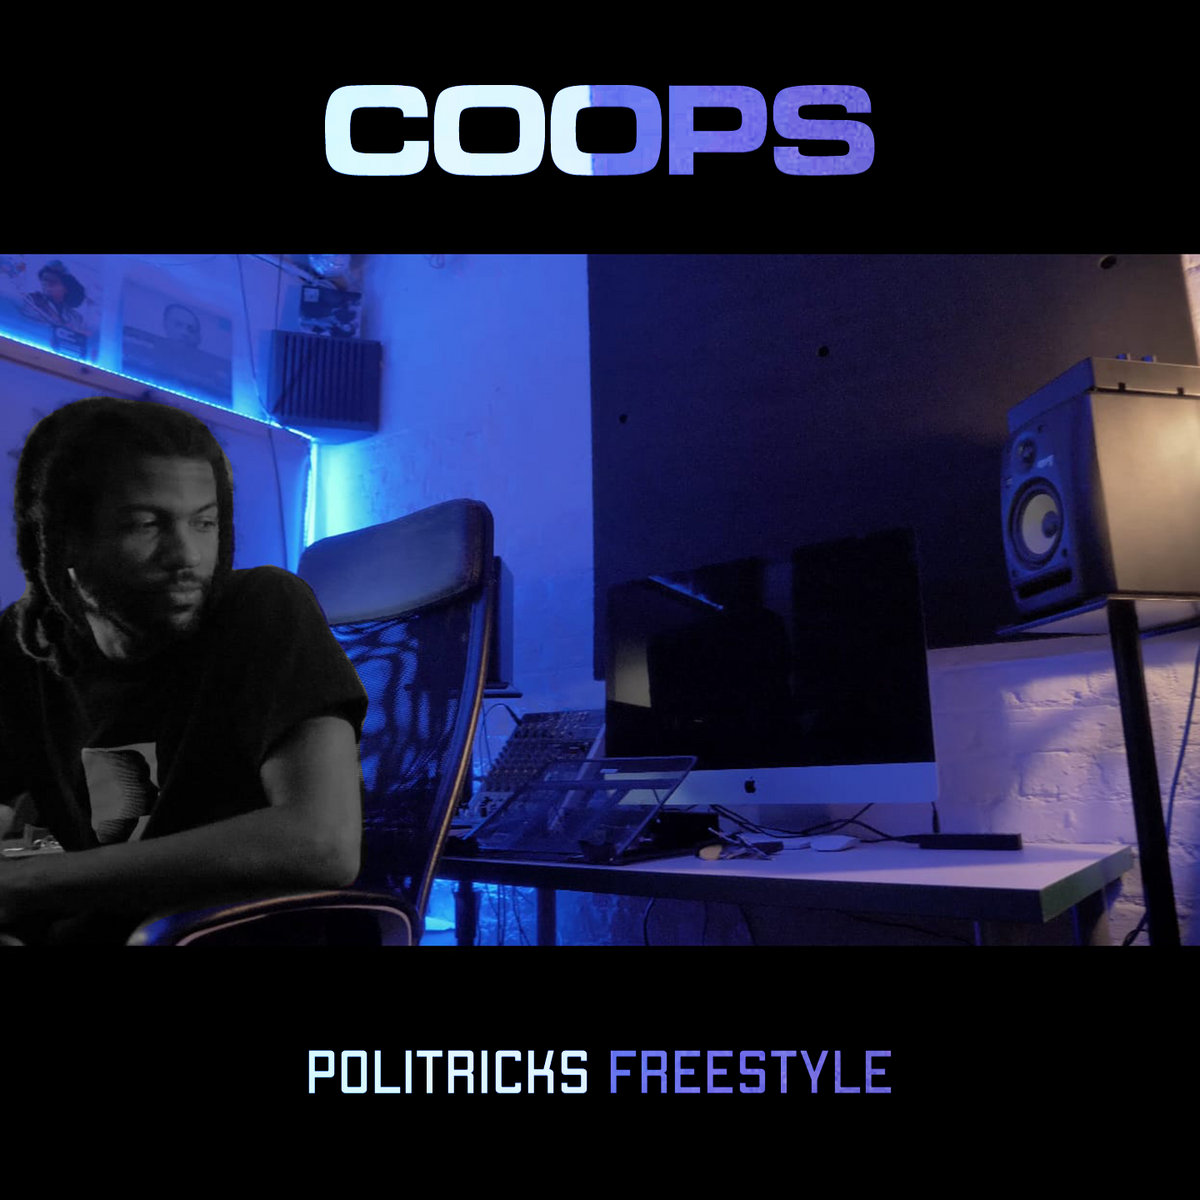 Politricks_freestyle_coops